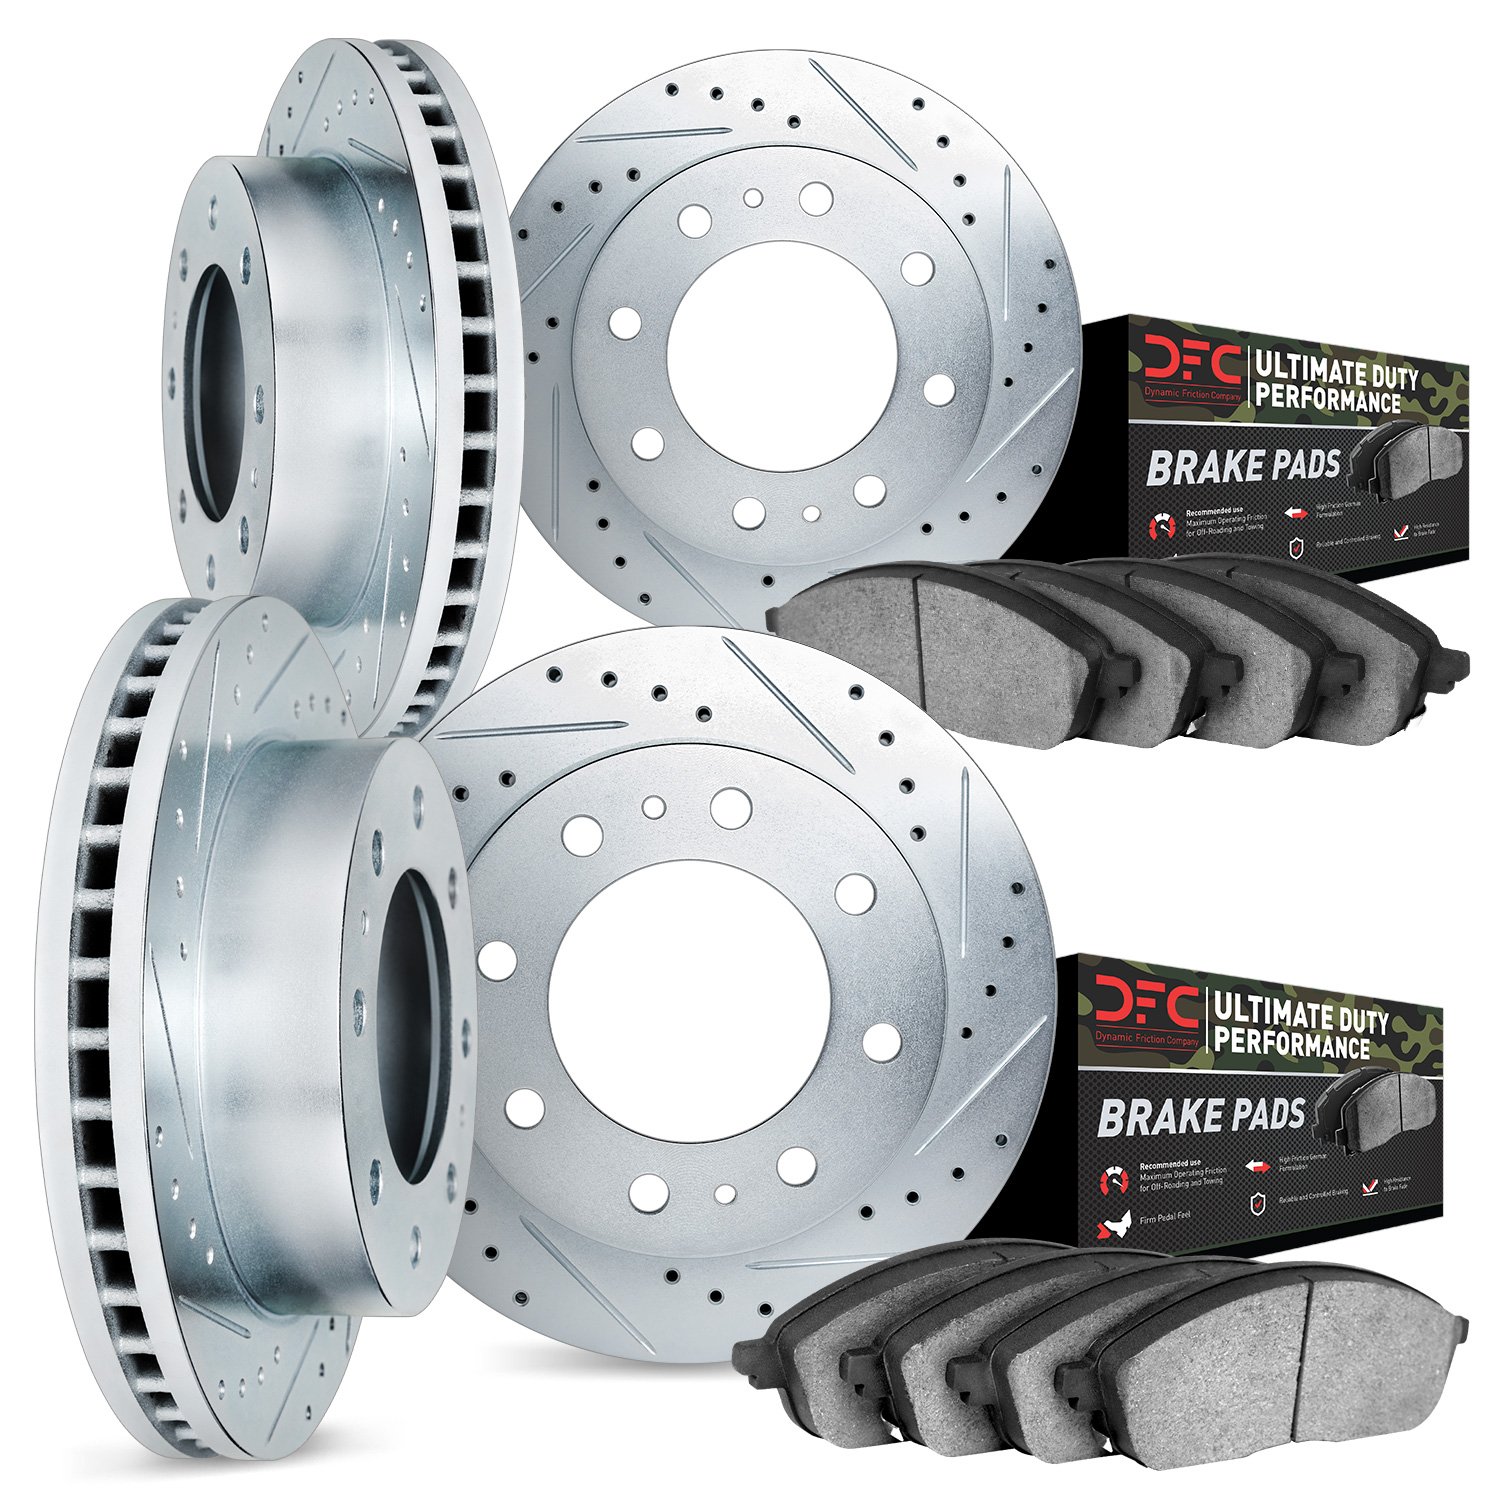 7404-54053 Drilled/Slotted Brake Rotors with Ultimate-Duty Brake Pads Kit [Silver], Fits Select Ford/Lincoln/Mercury/Mazda, Posi